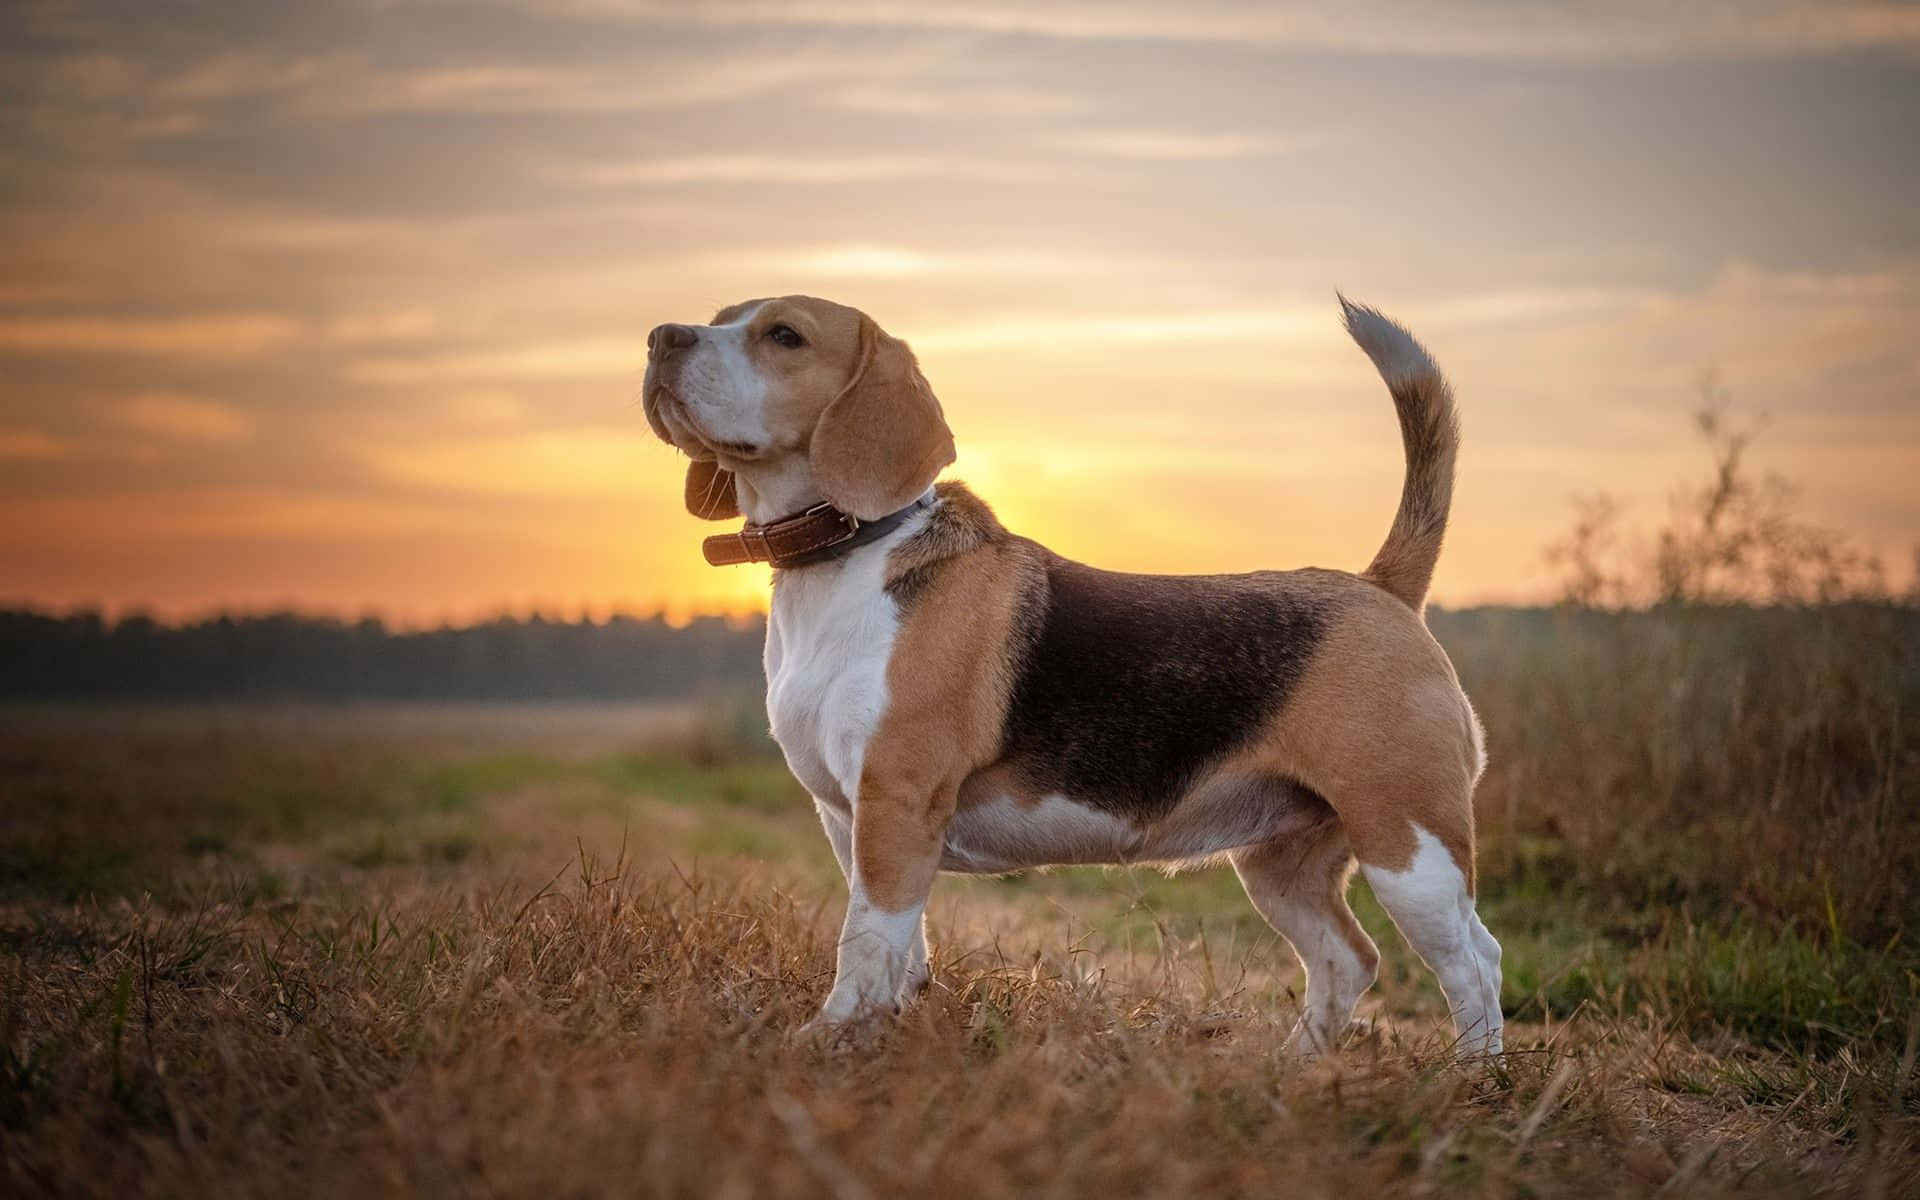 "Cute beagle dog looking at the camera with a playful expression"